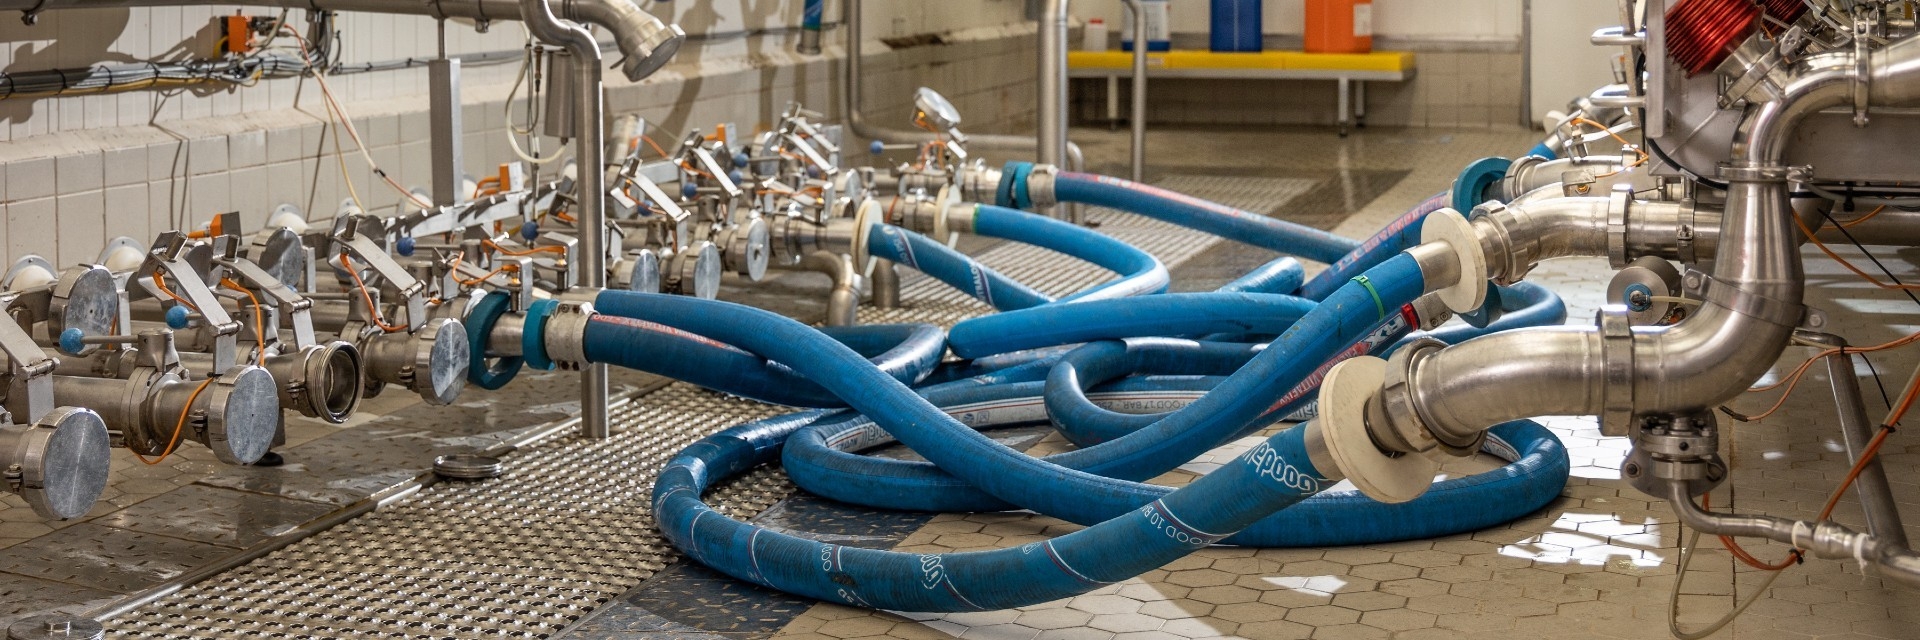 Döhler Holland invests in safety with hose inspections 